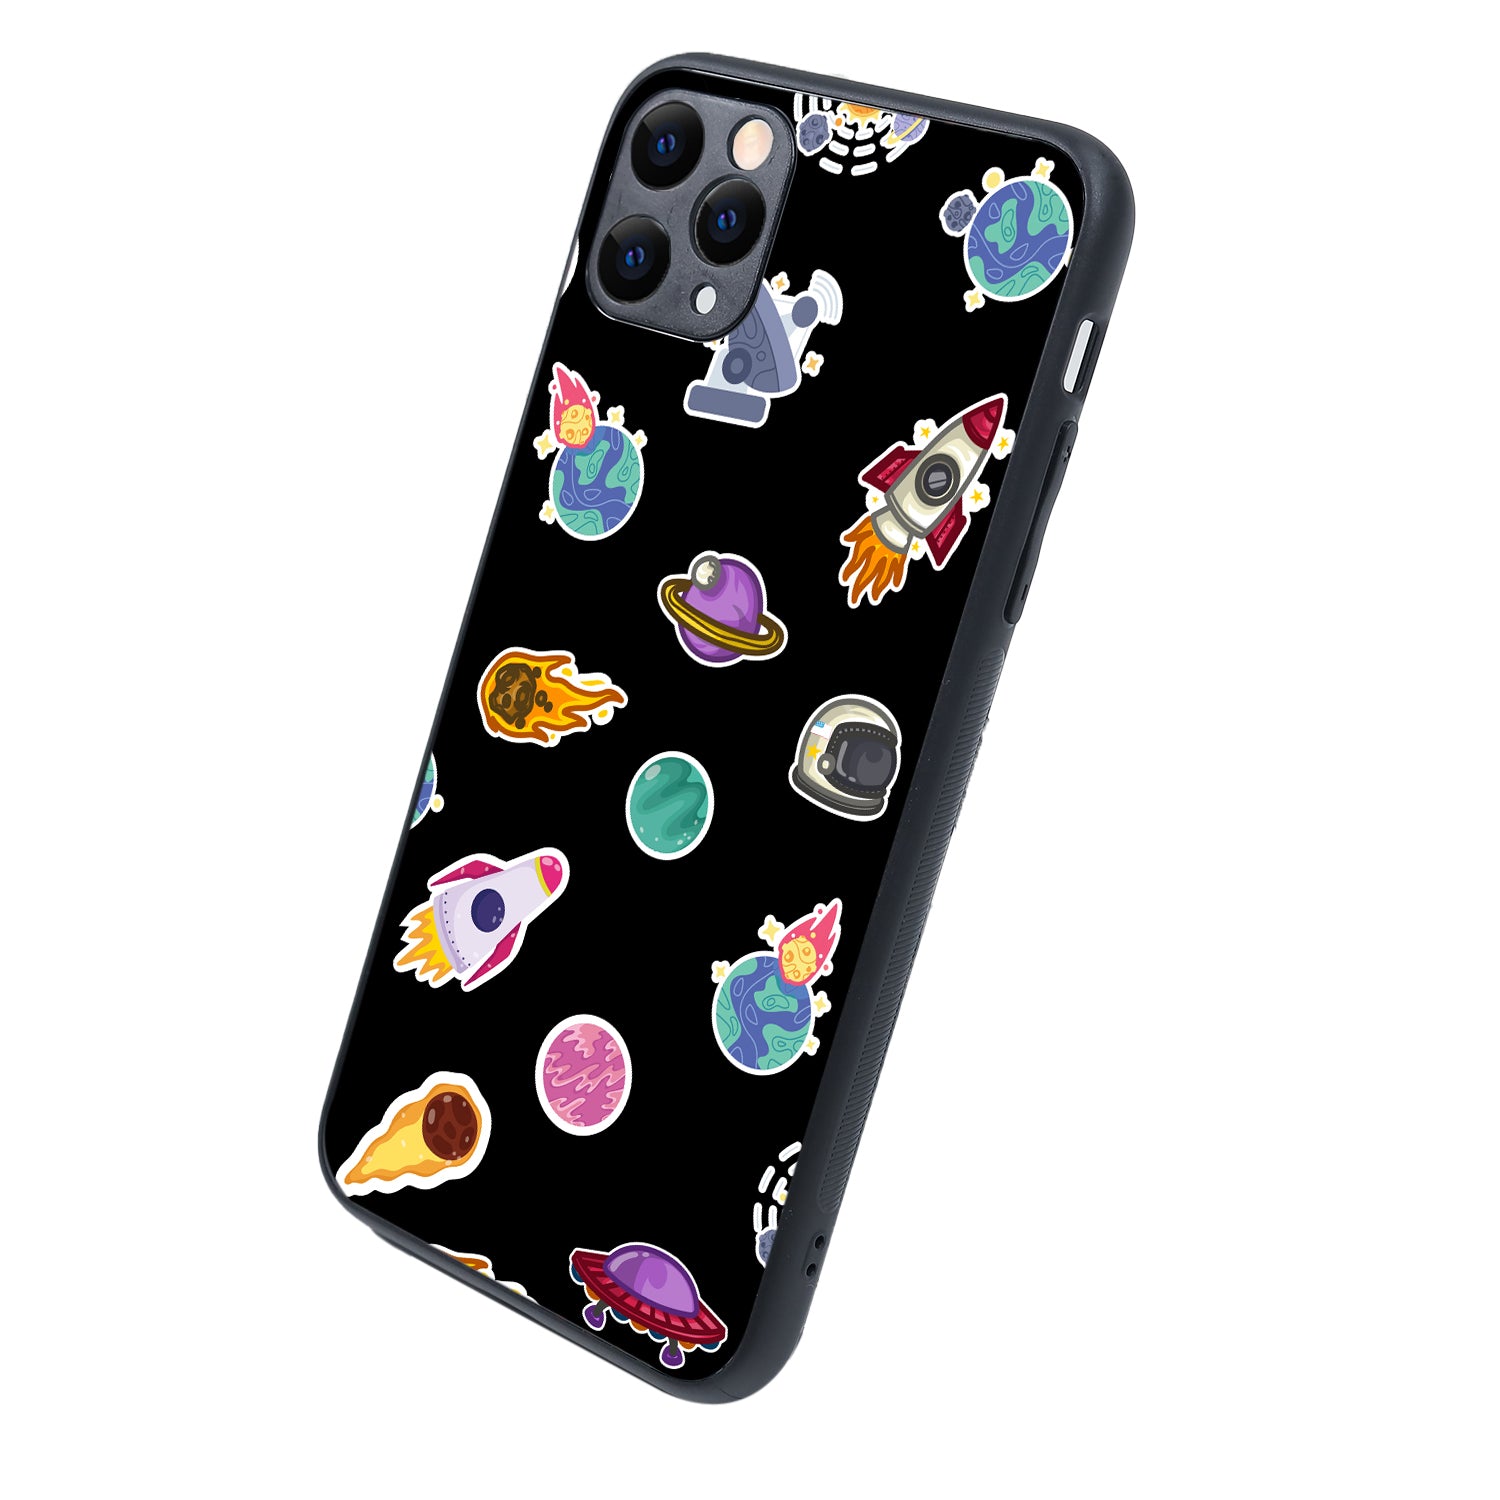 Stickers Space iPhone 11 Pro Max Case